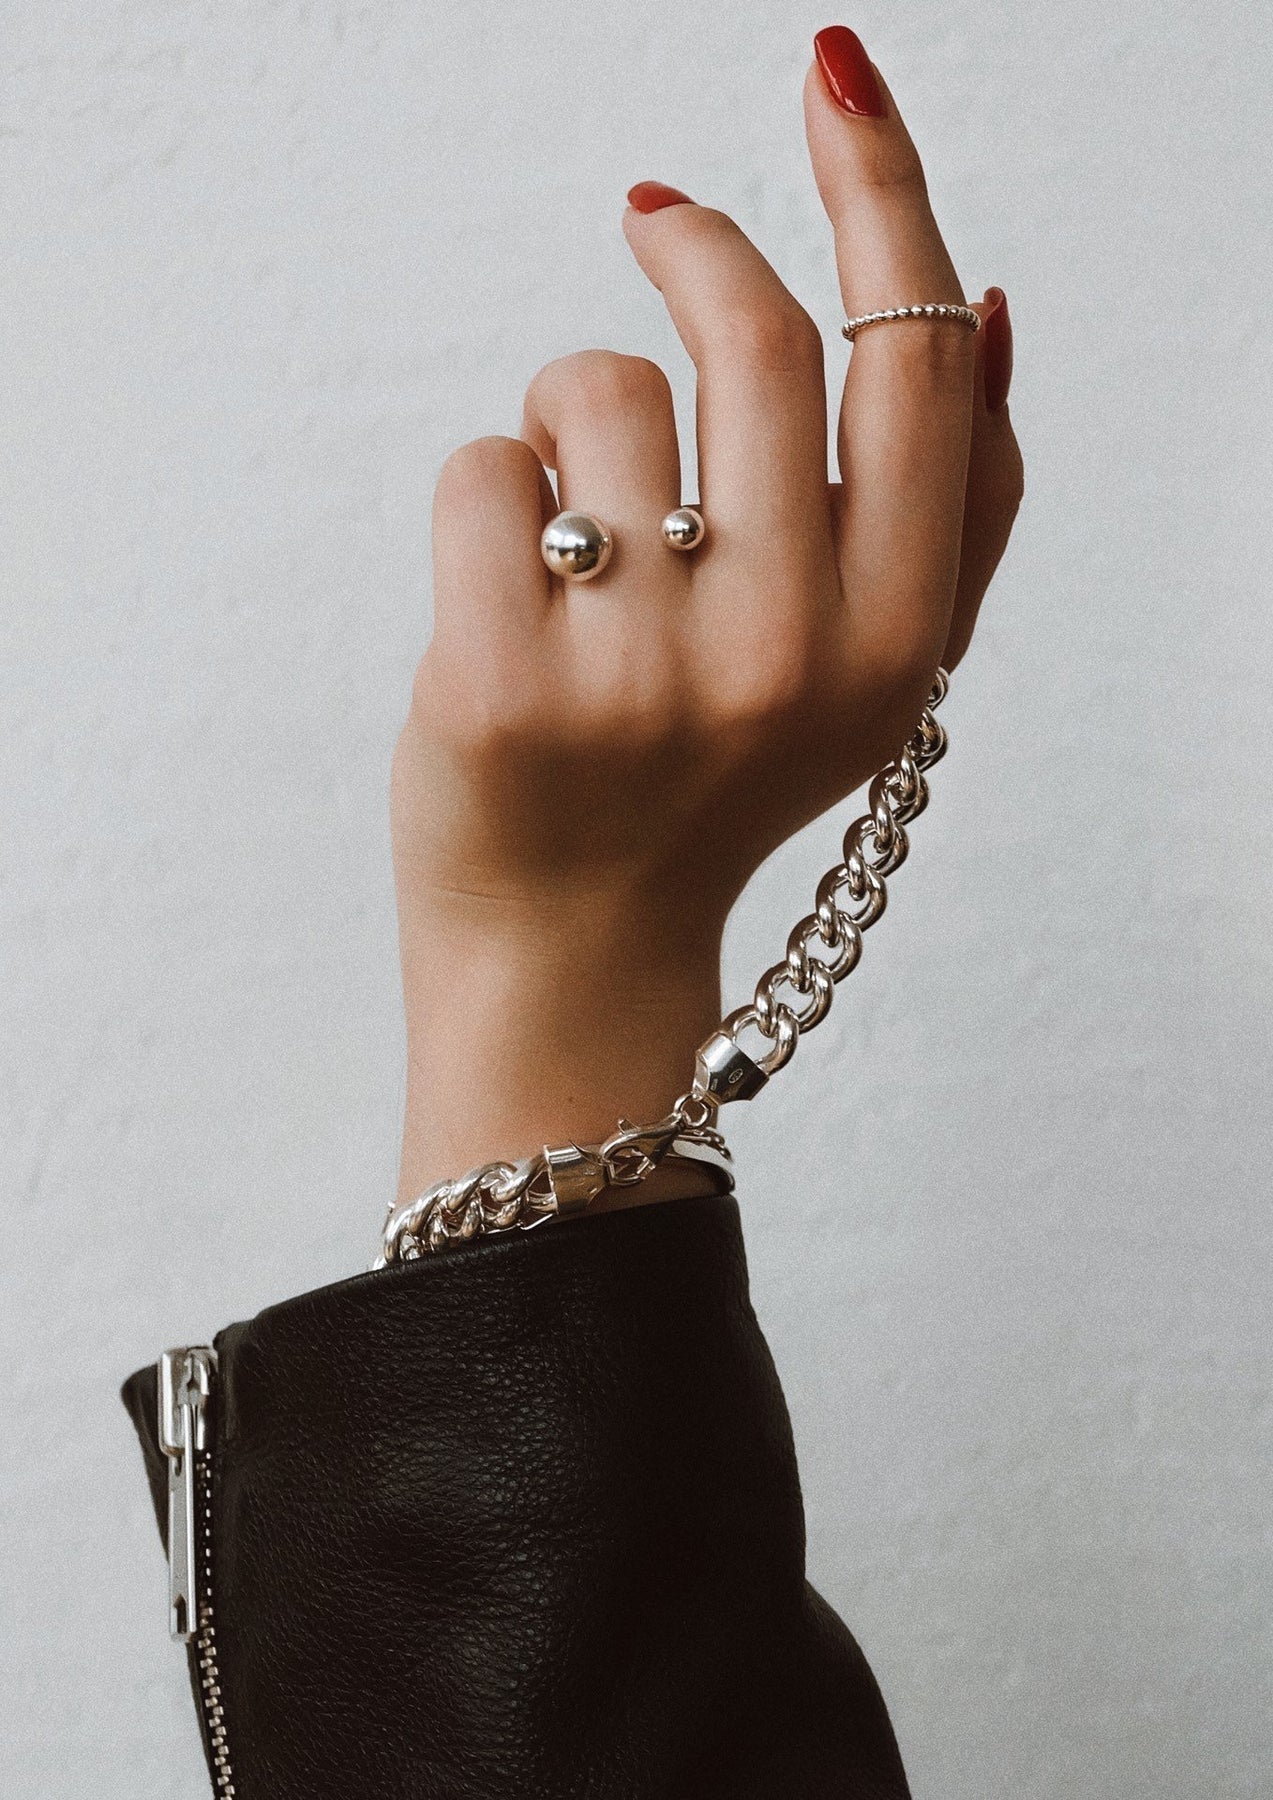 A hand wearing a Big Bomb Multisize Ring in Silver, showcasing a 6mm and 10mm hollow bubble design on a 1.8mm band. Handcrafted in Lithuania from sterling silver.